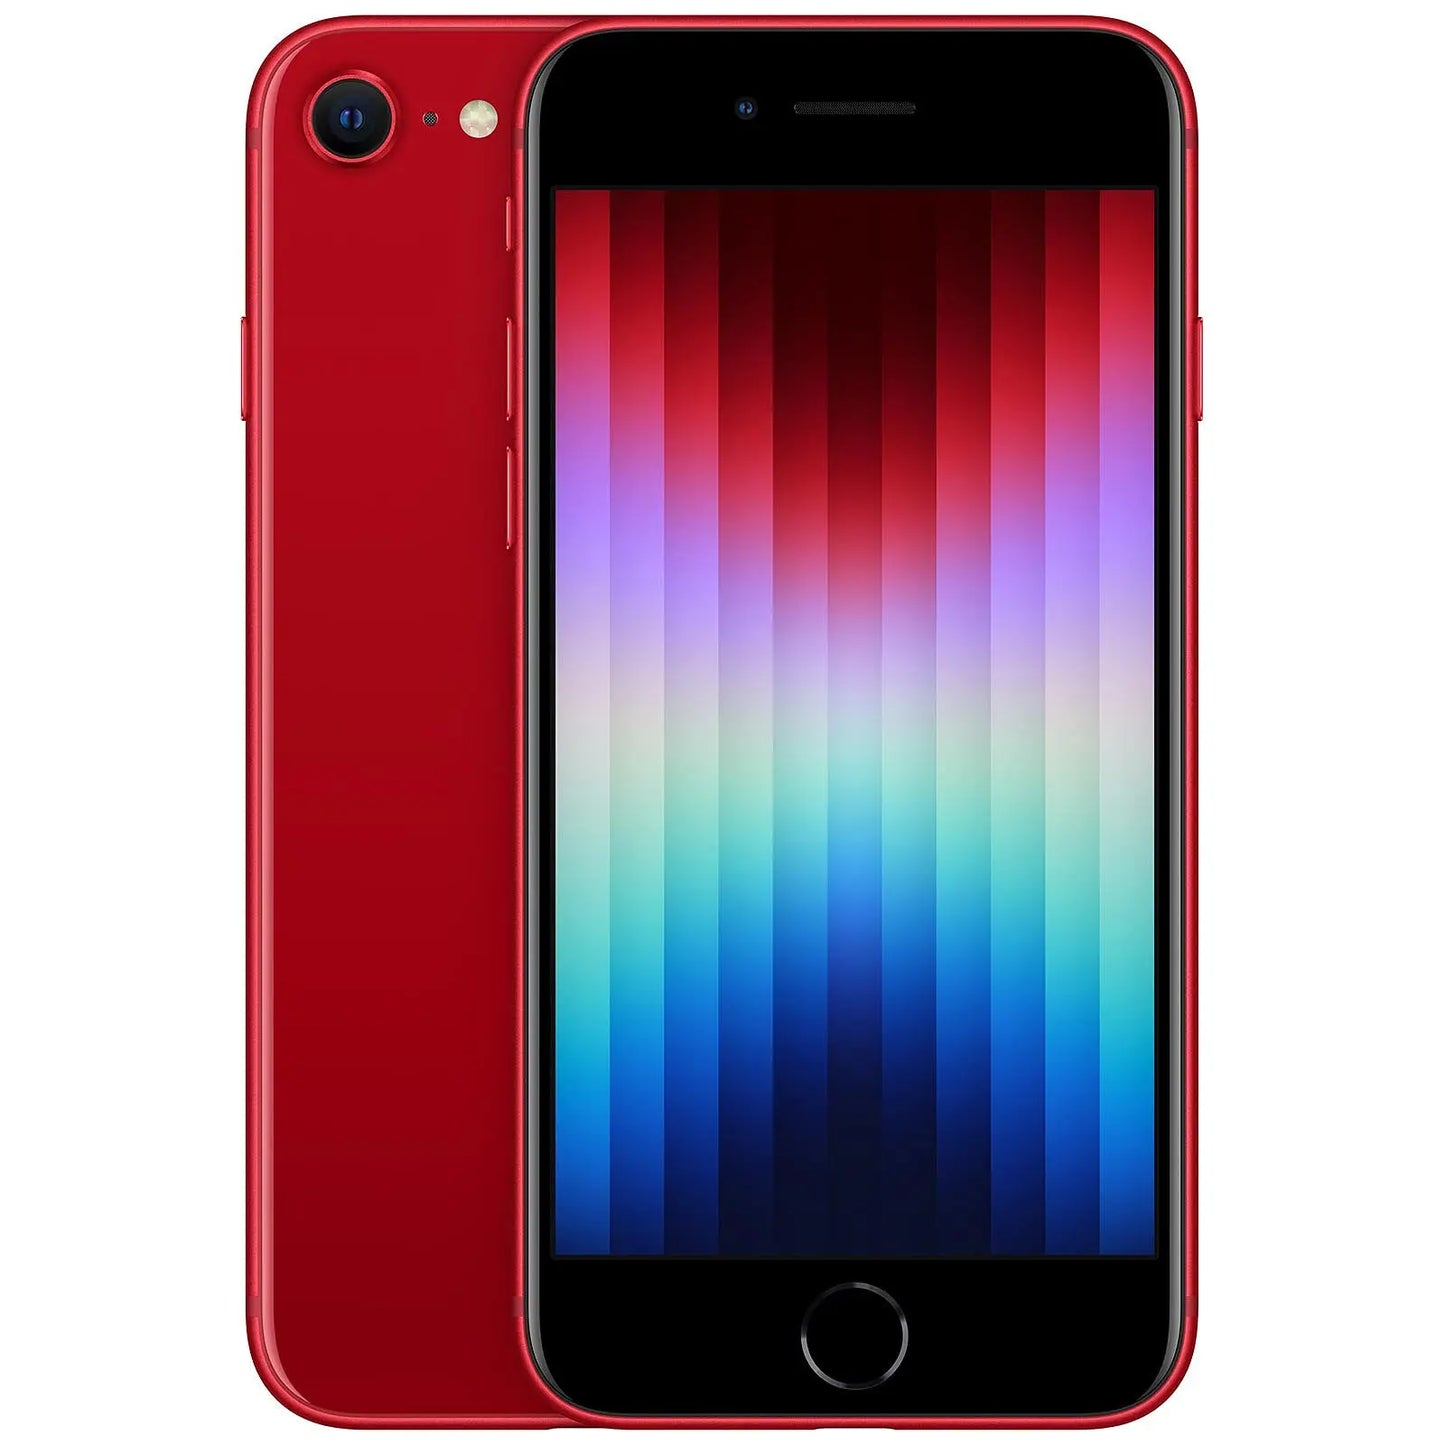 Apple iPhone SE 64 Go (PRODUCT)RED (2022) 0194253013778 APPLE